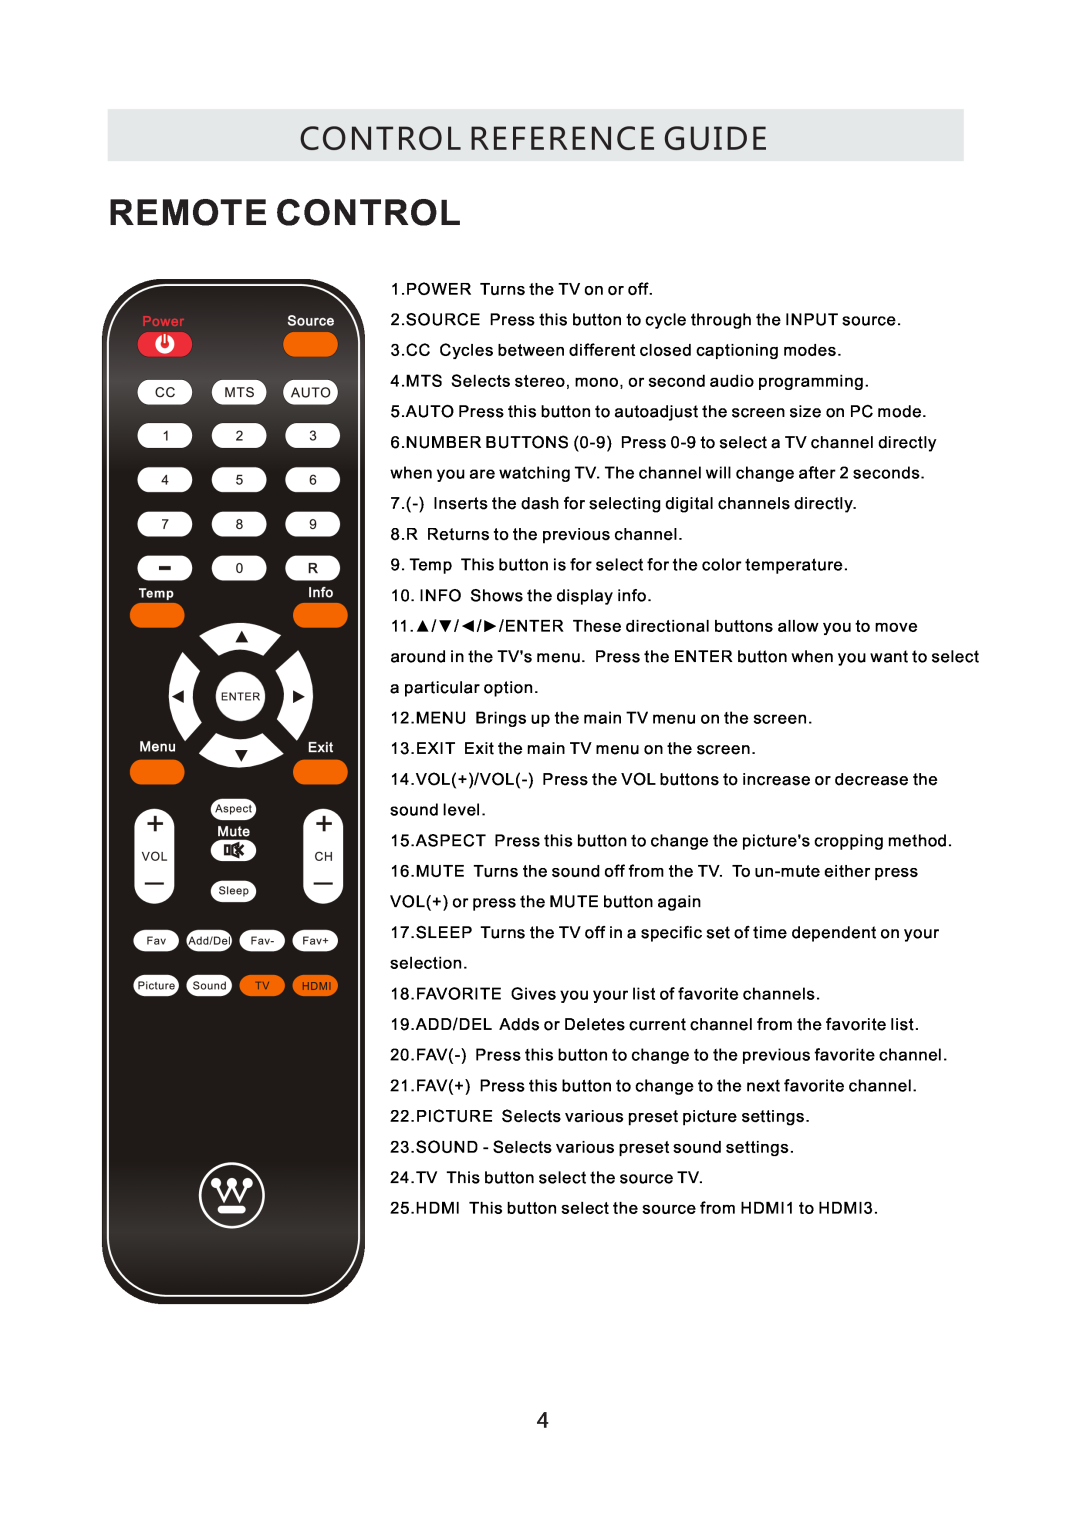 Westinghouse CW50T9XW user manual Remote Control, Control Reference Guide 